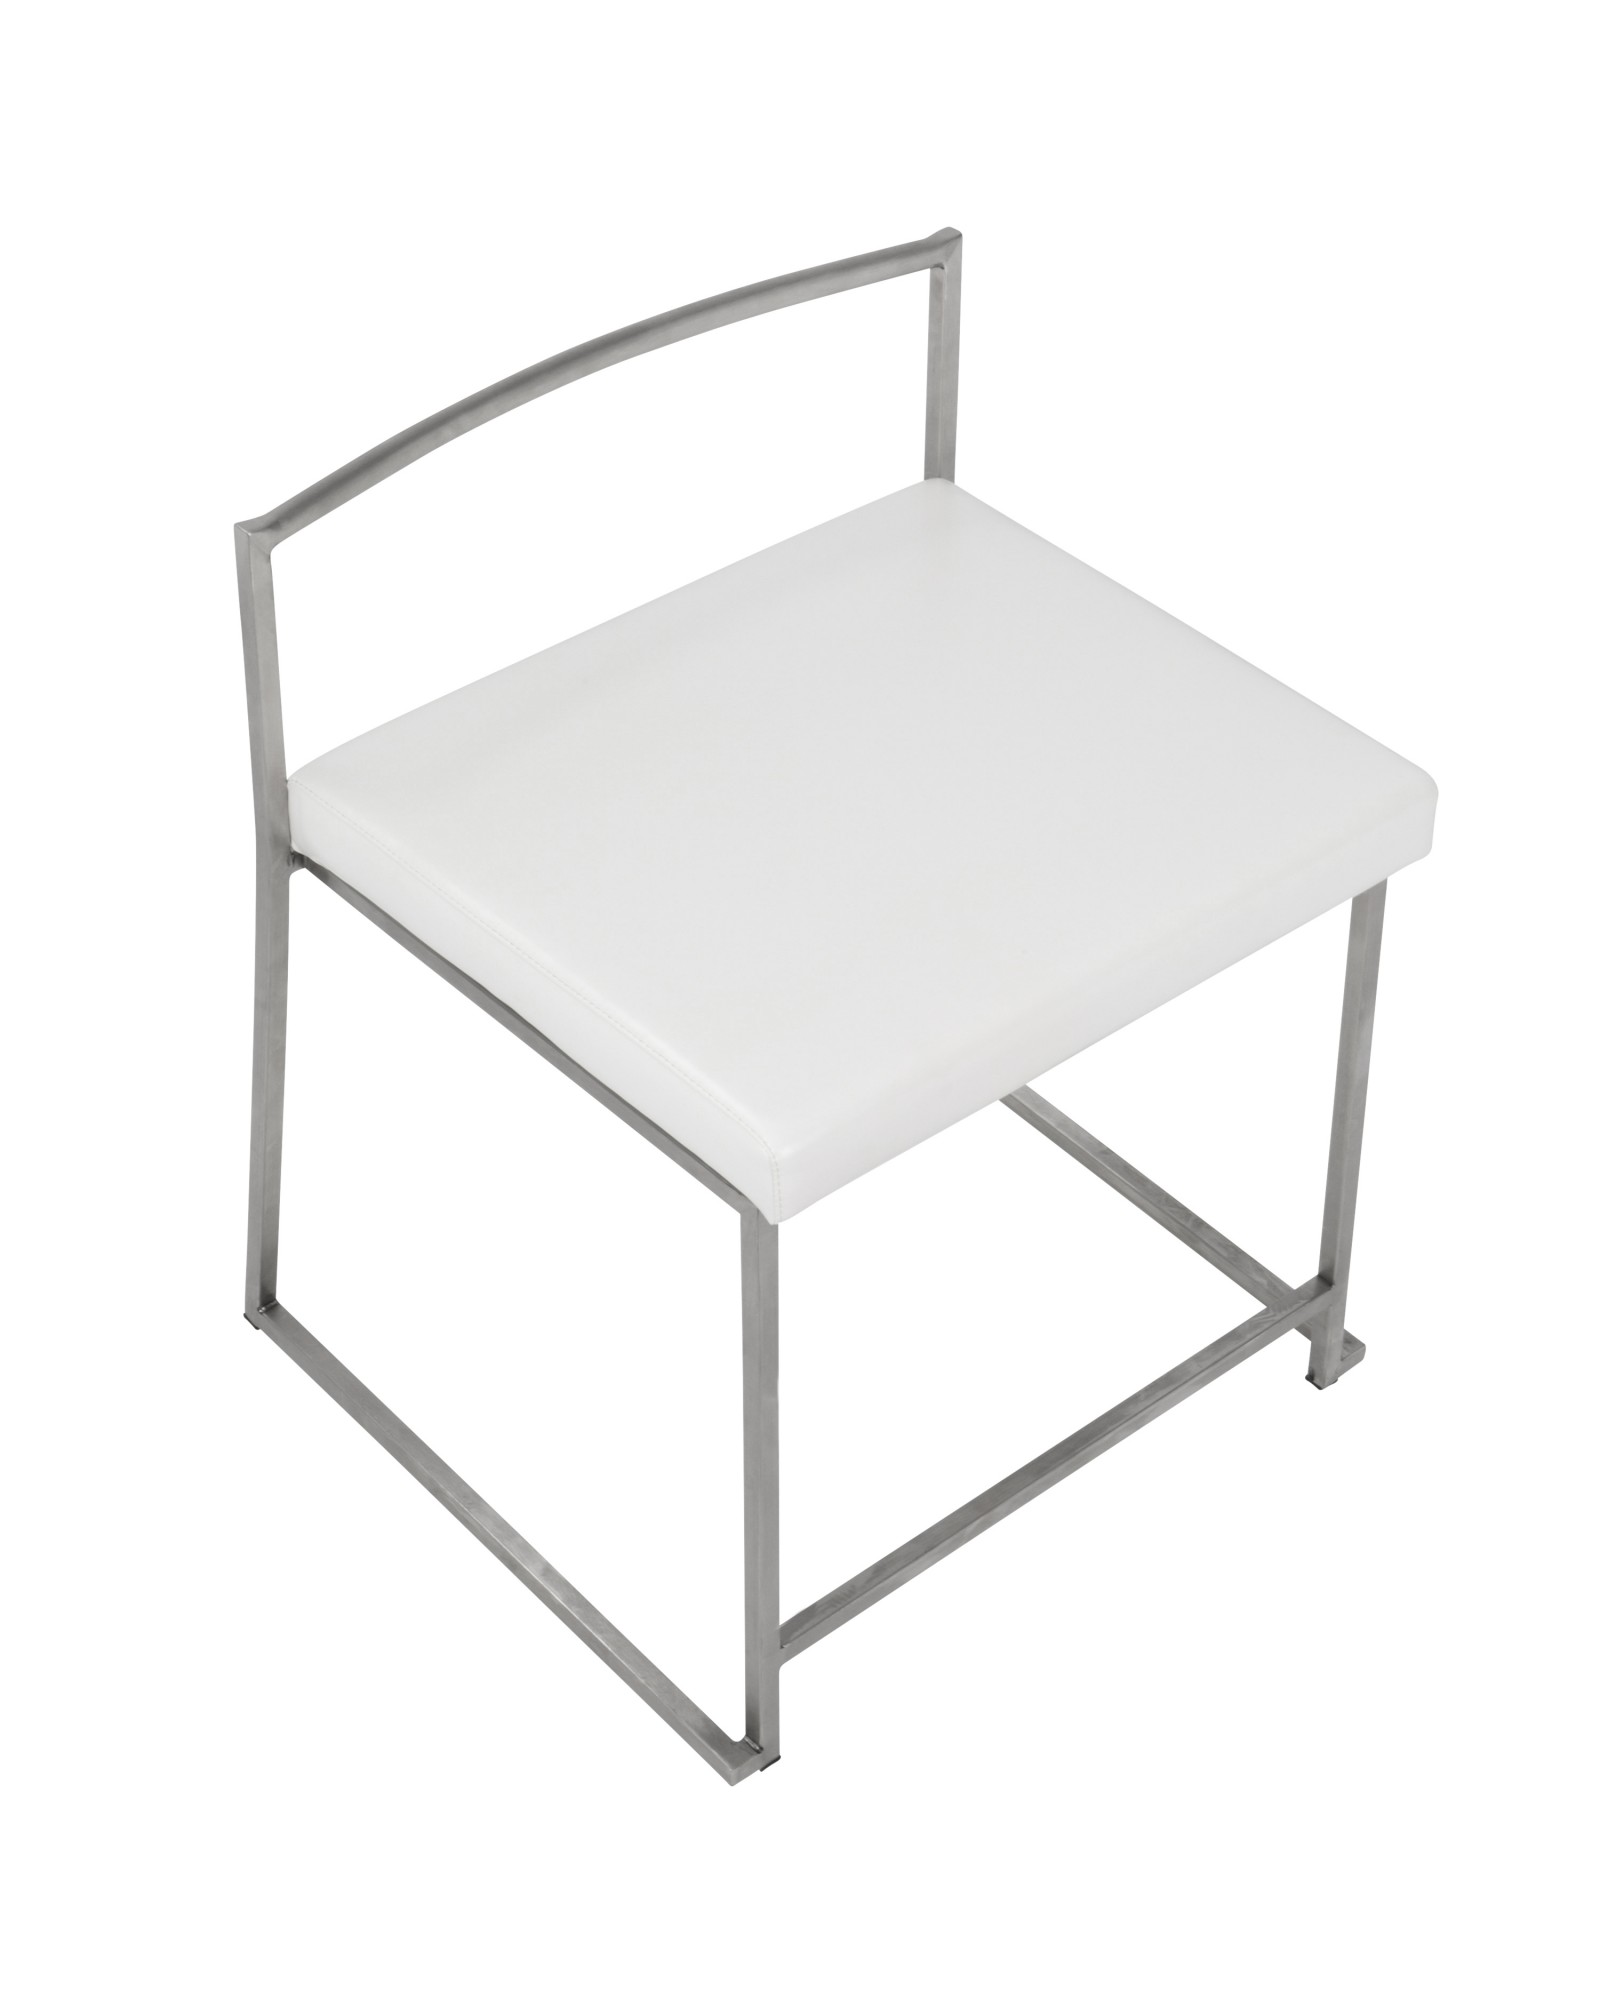 Fuji Contemporary Stackable Dining Chair in White Faux Leather - Set of 2